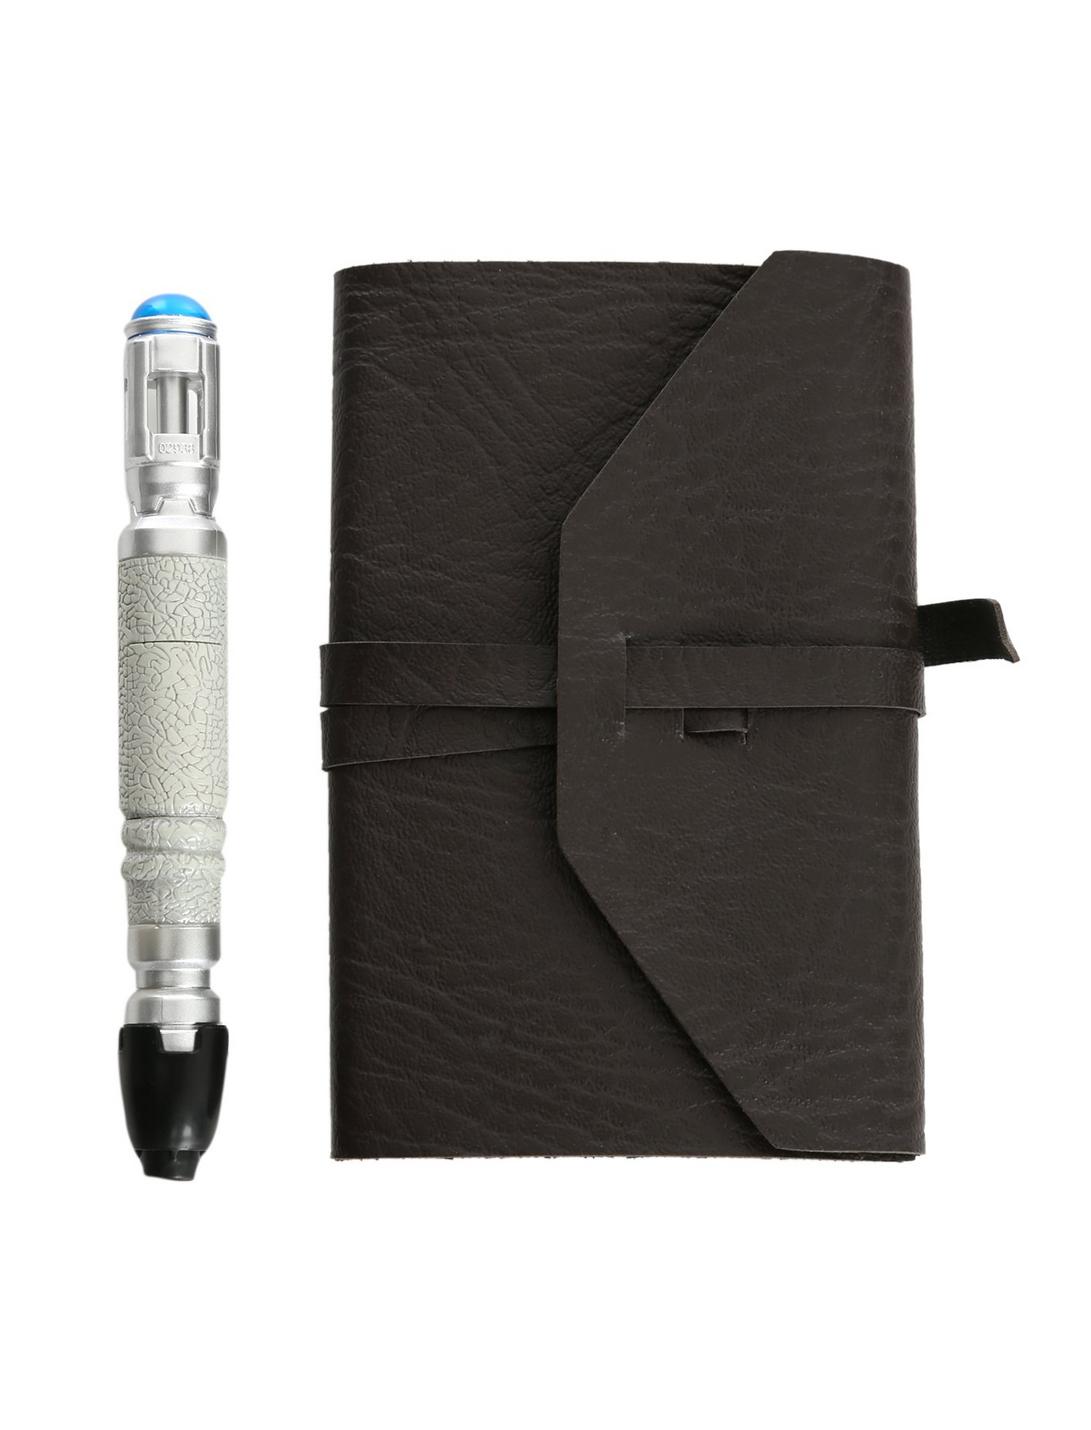 Doctor Who Journal Of Impossible Things With Mini Sonic Screwdriver Pen, , hi-res